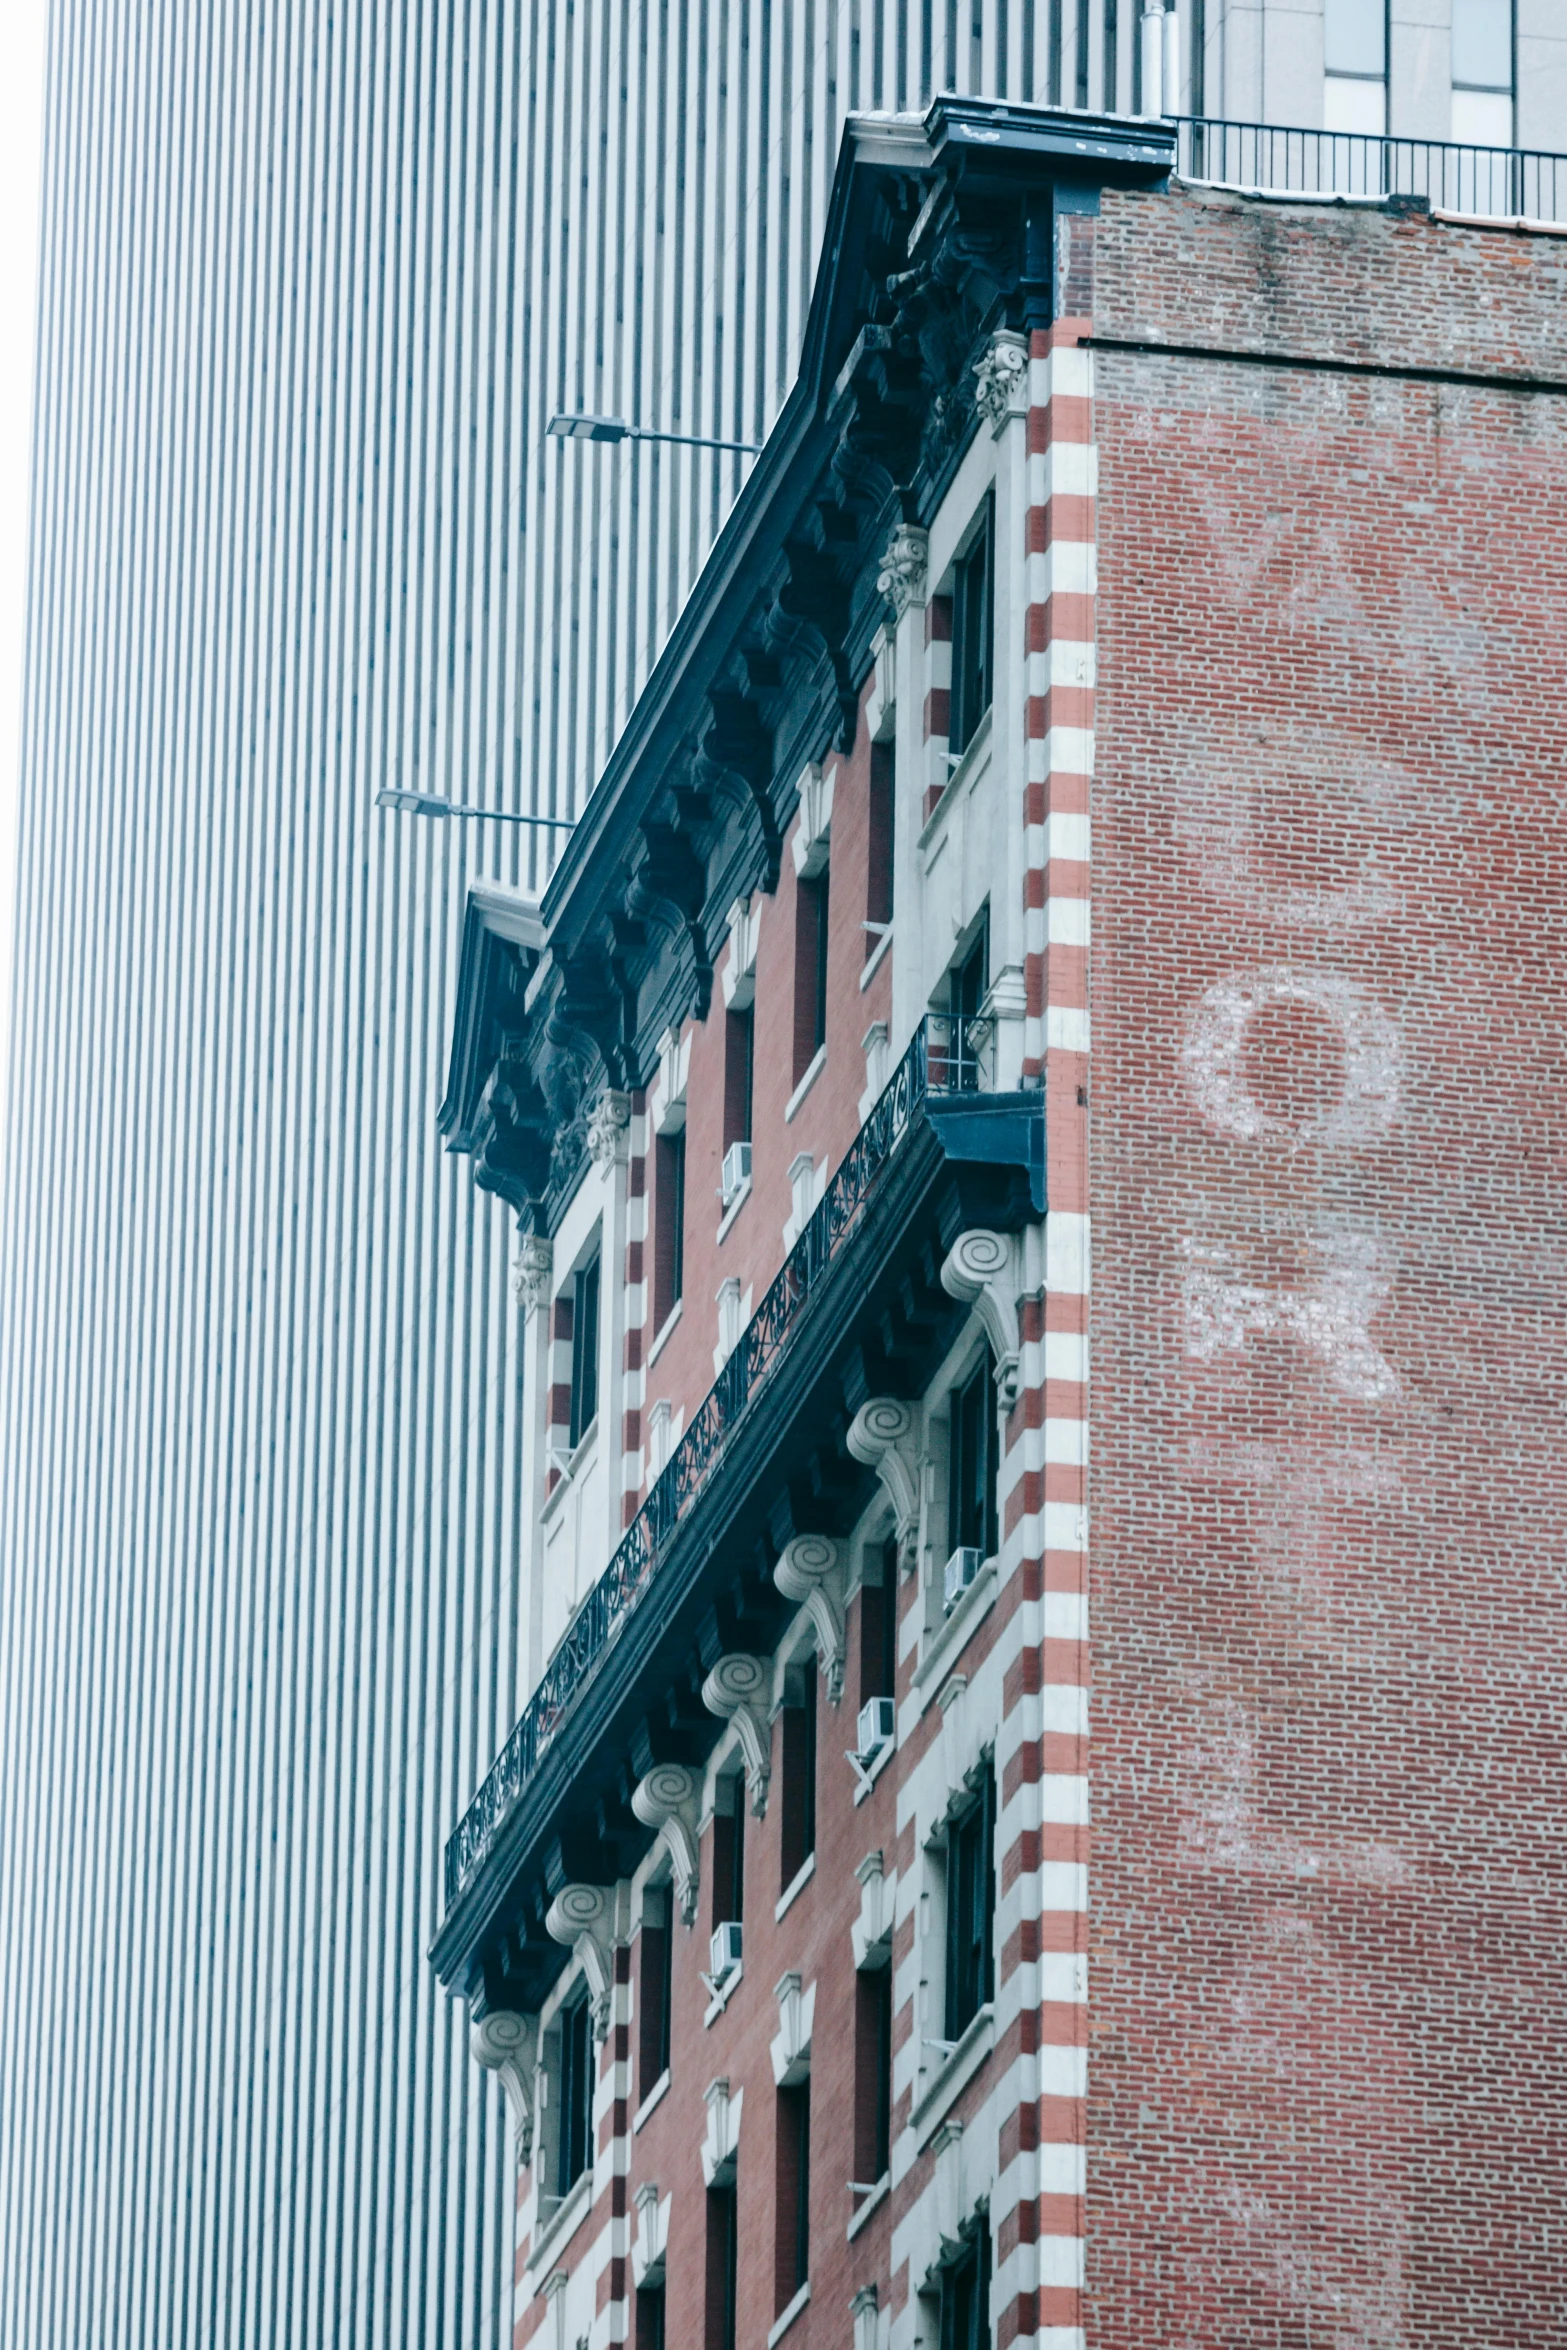 a clock that is on the side of a building, inspired by Paul Cornoyer, graffiti, 2019 trending photo, new york buildings, sparse detail, 1999 photograph